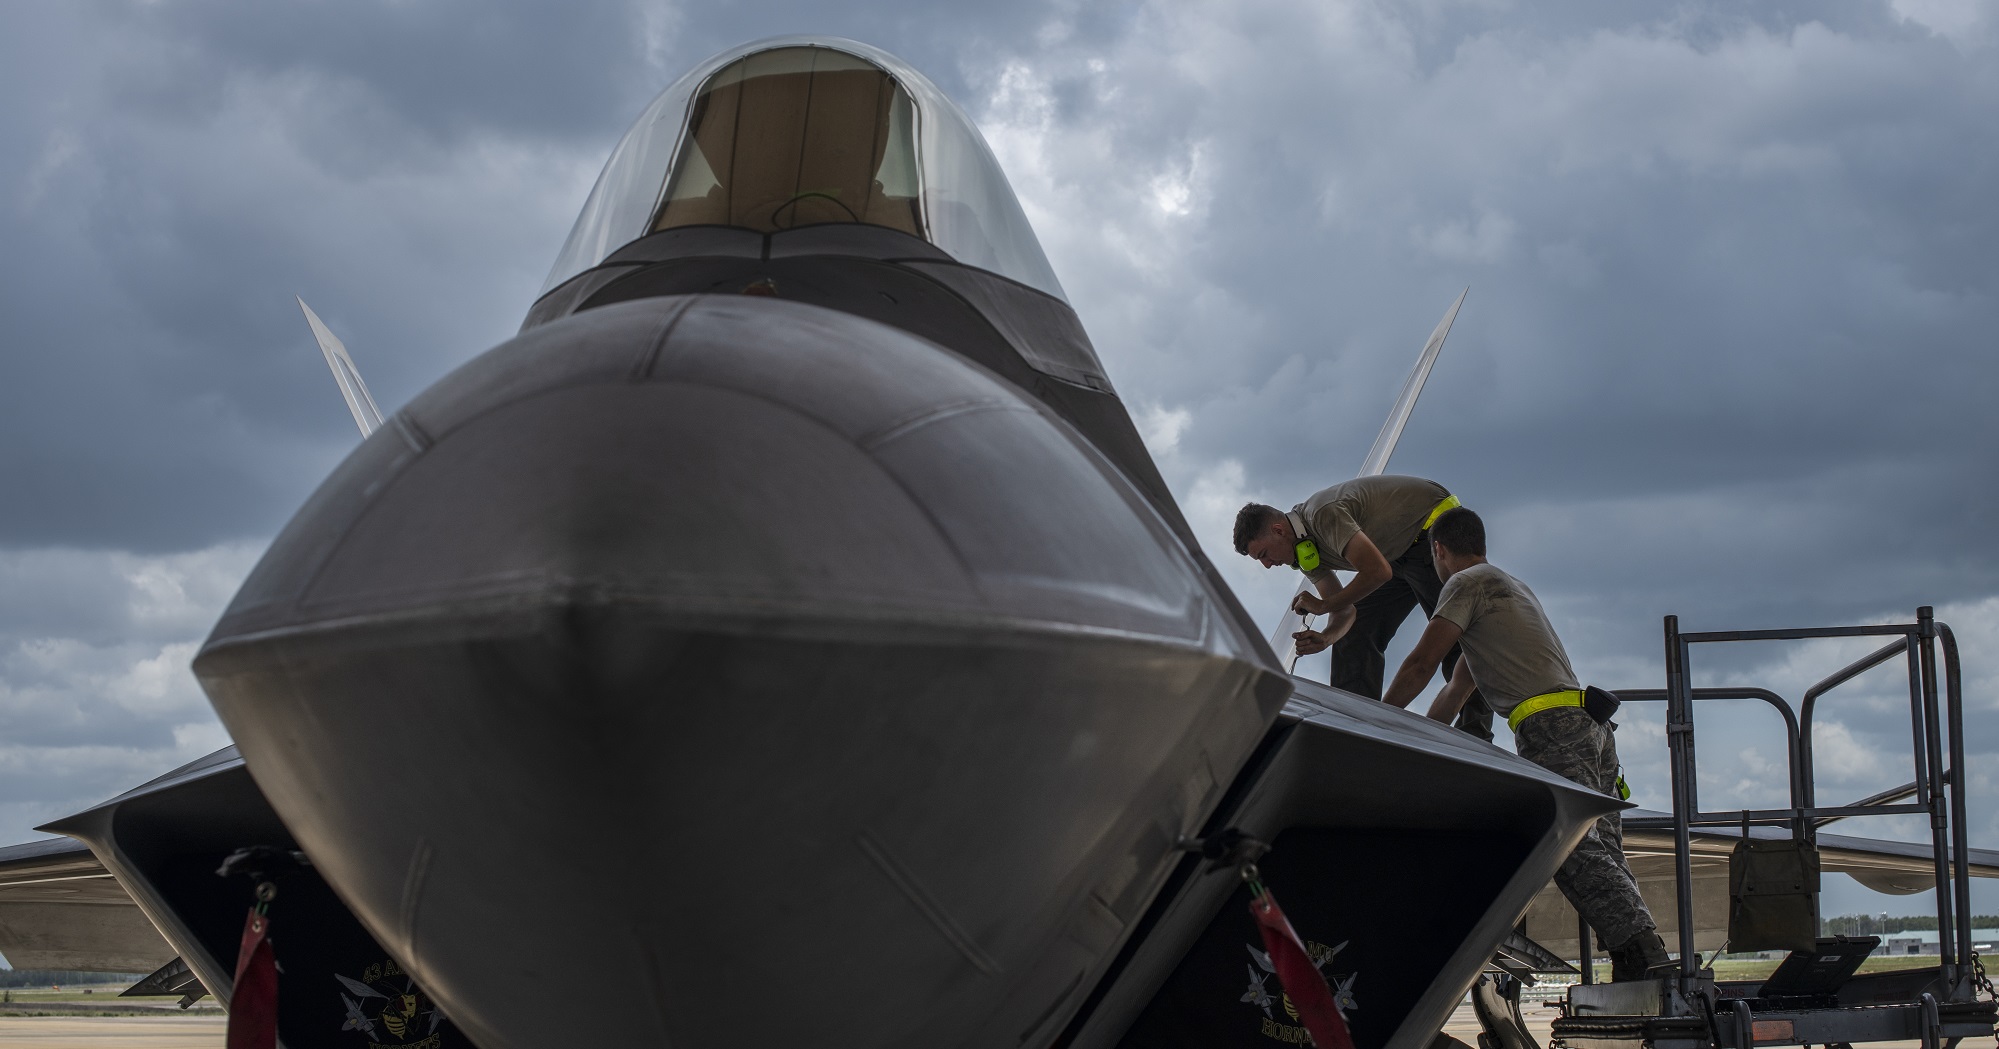 Sloppy maintenance culture, multiple errors caused F-22 to overheat,  investigation finds